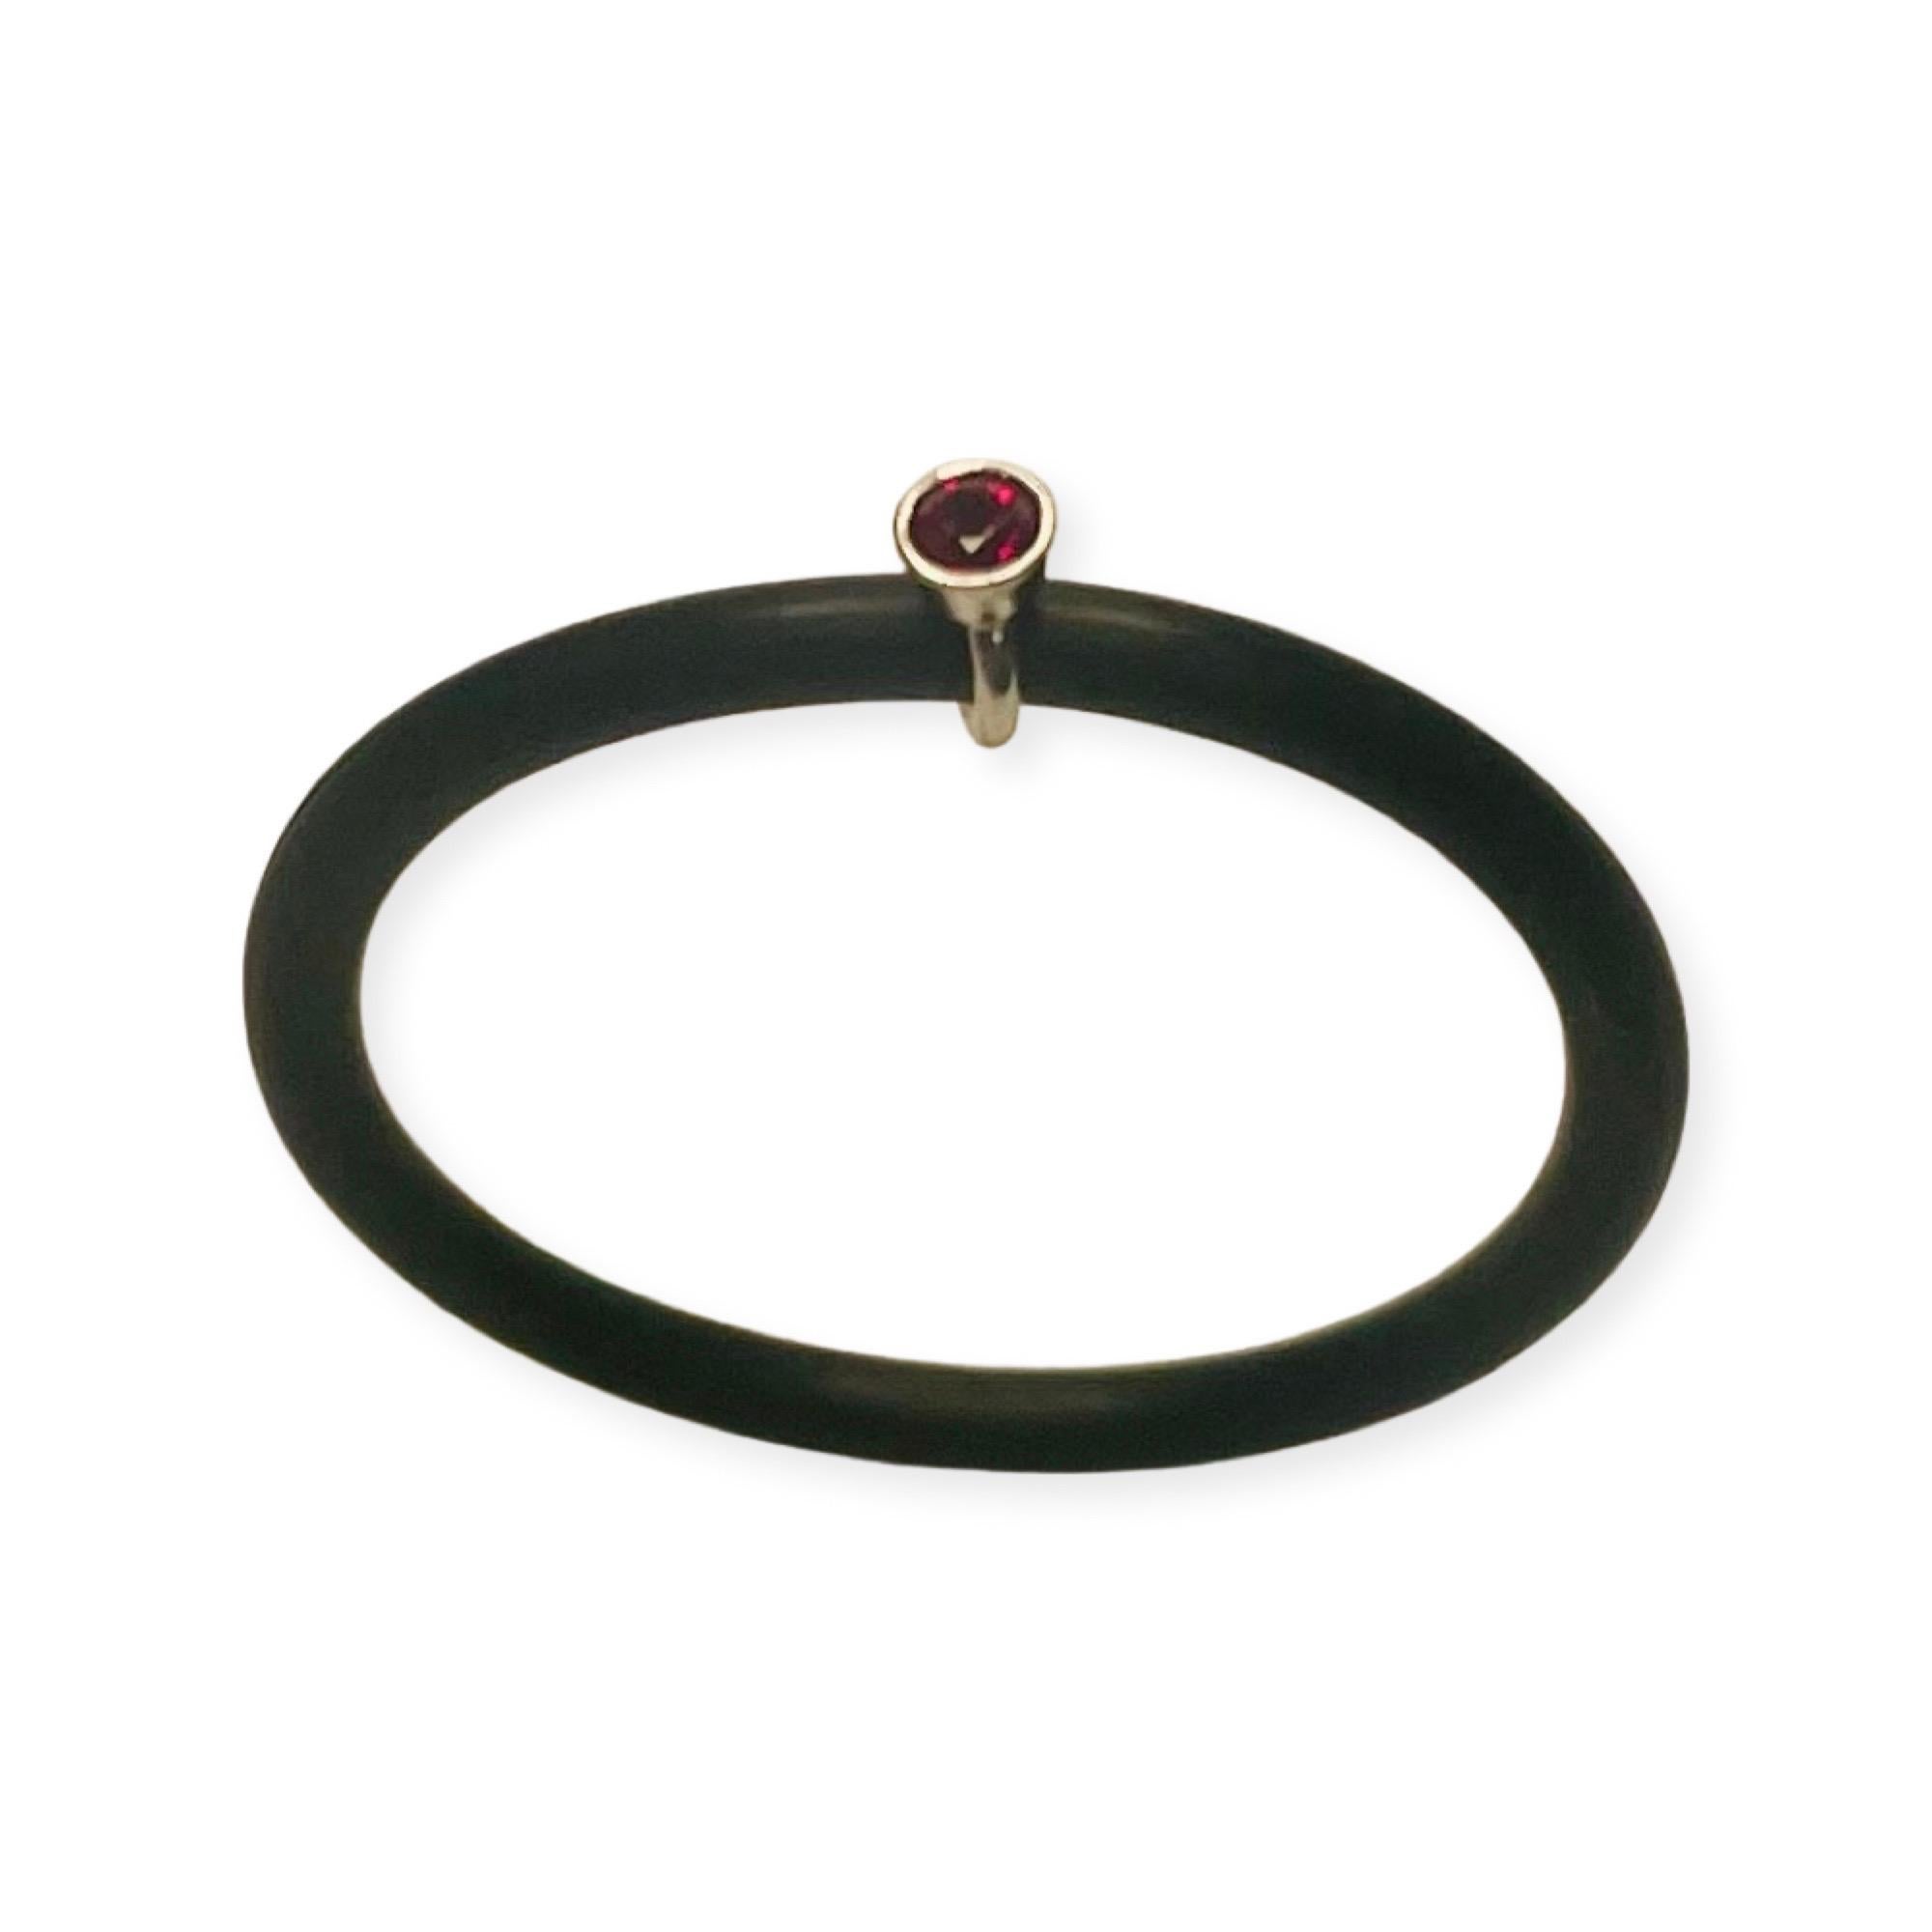 Chris Correia Platinum Ruby Rubber Ring. There is 1 natural ruby. The ruby is 2.0 mm and set in a 2.15 mm platinum bezel. The rubber shank is 1.5 mm wide.  It is finger size 7 but we can size it for an additional fee. 
100-60-174